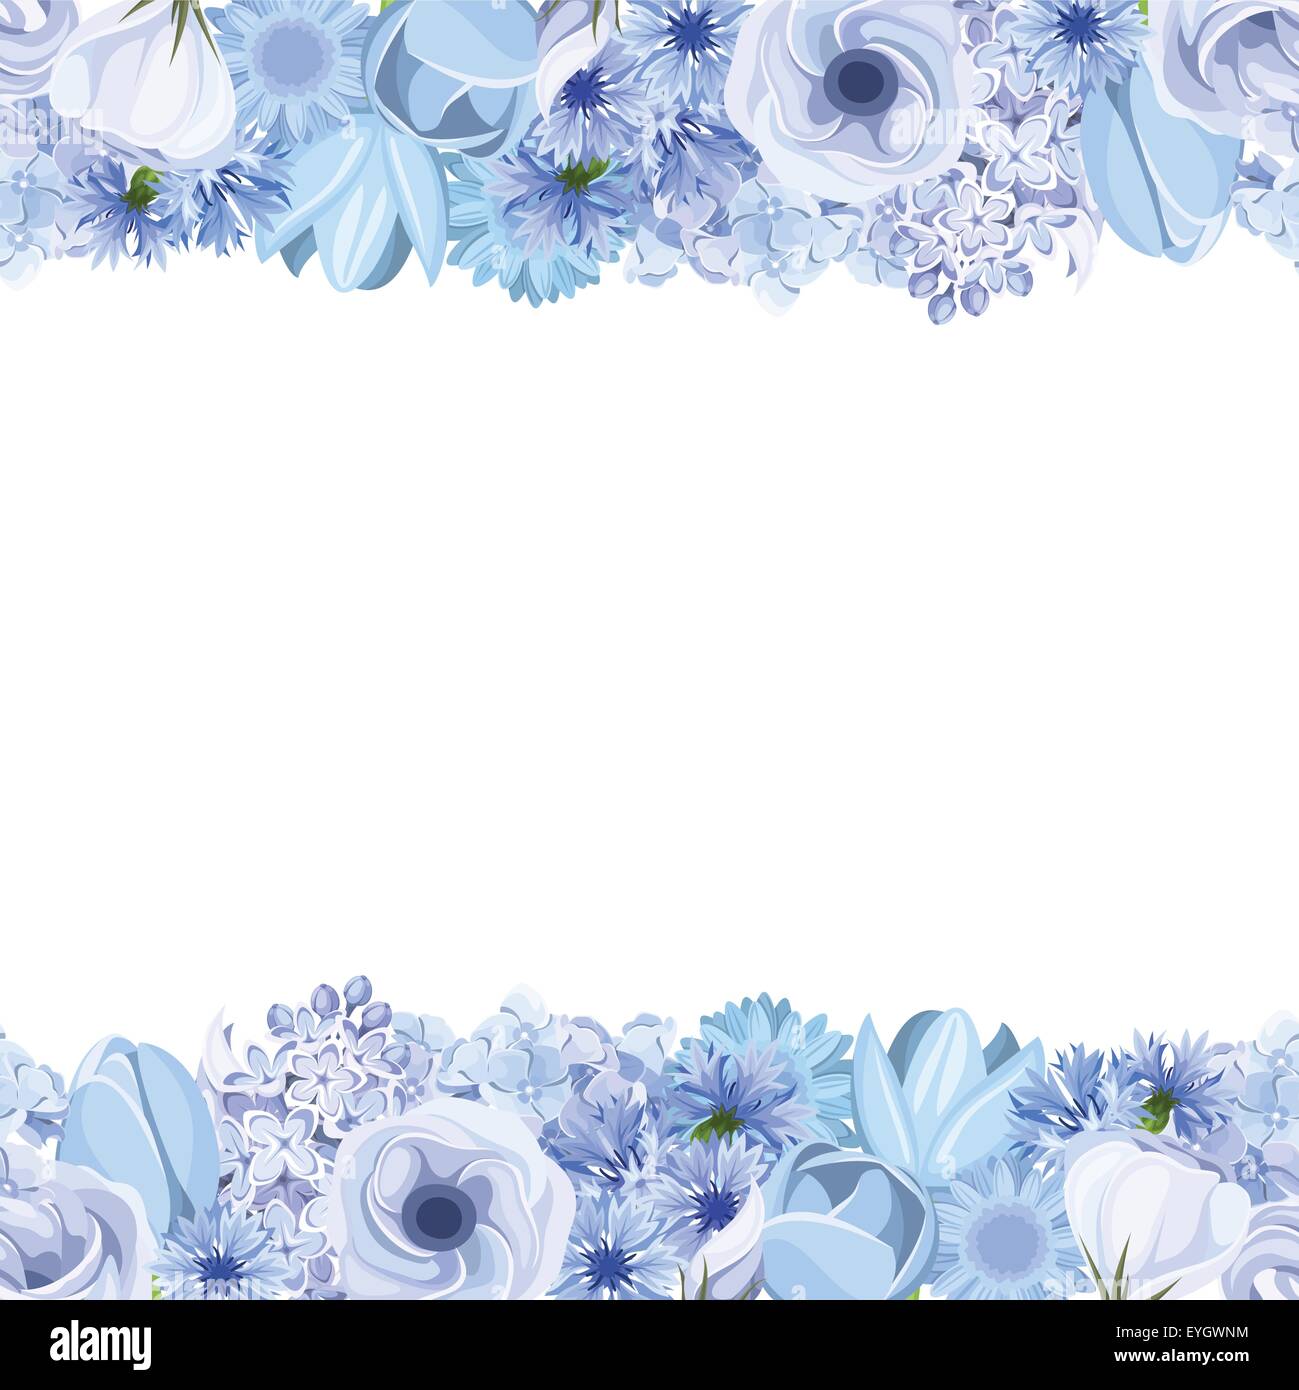 Horizontal seamless background with blue flowers. Vector illustration. Stock Vector